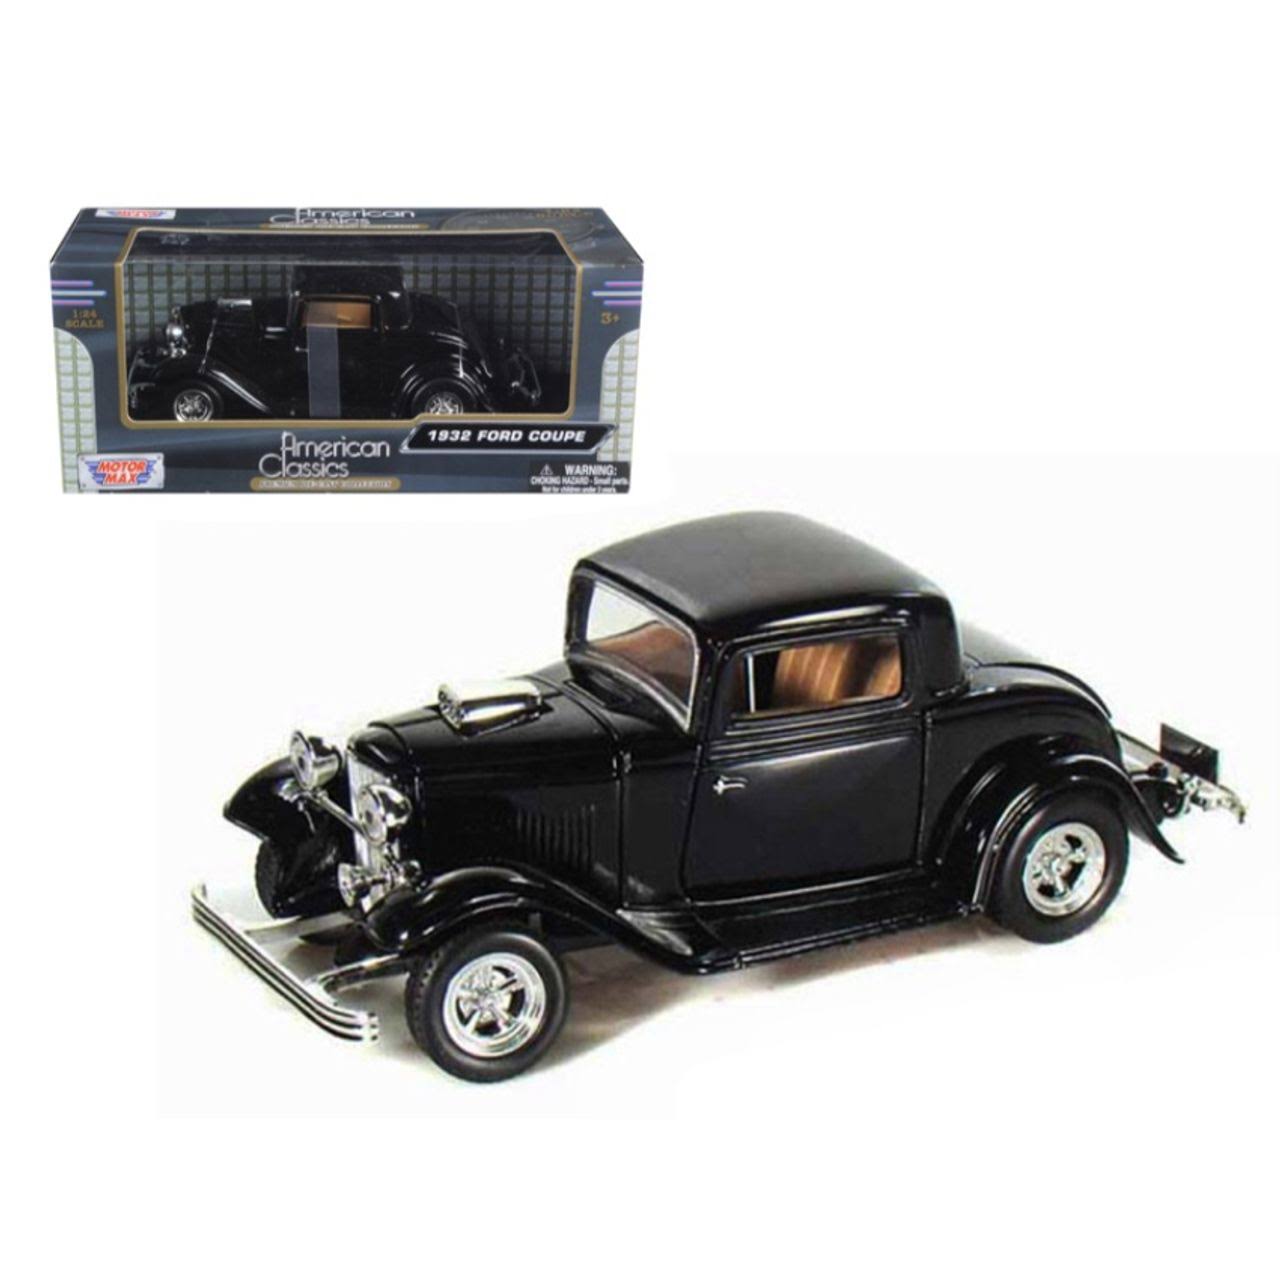 1932 Ford Coupe Black 1/24 Diecast Model Car by Motormax